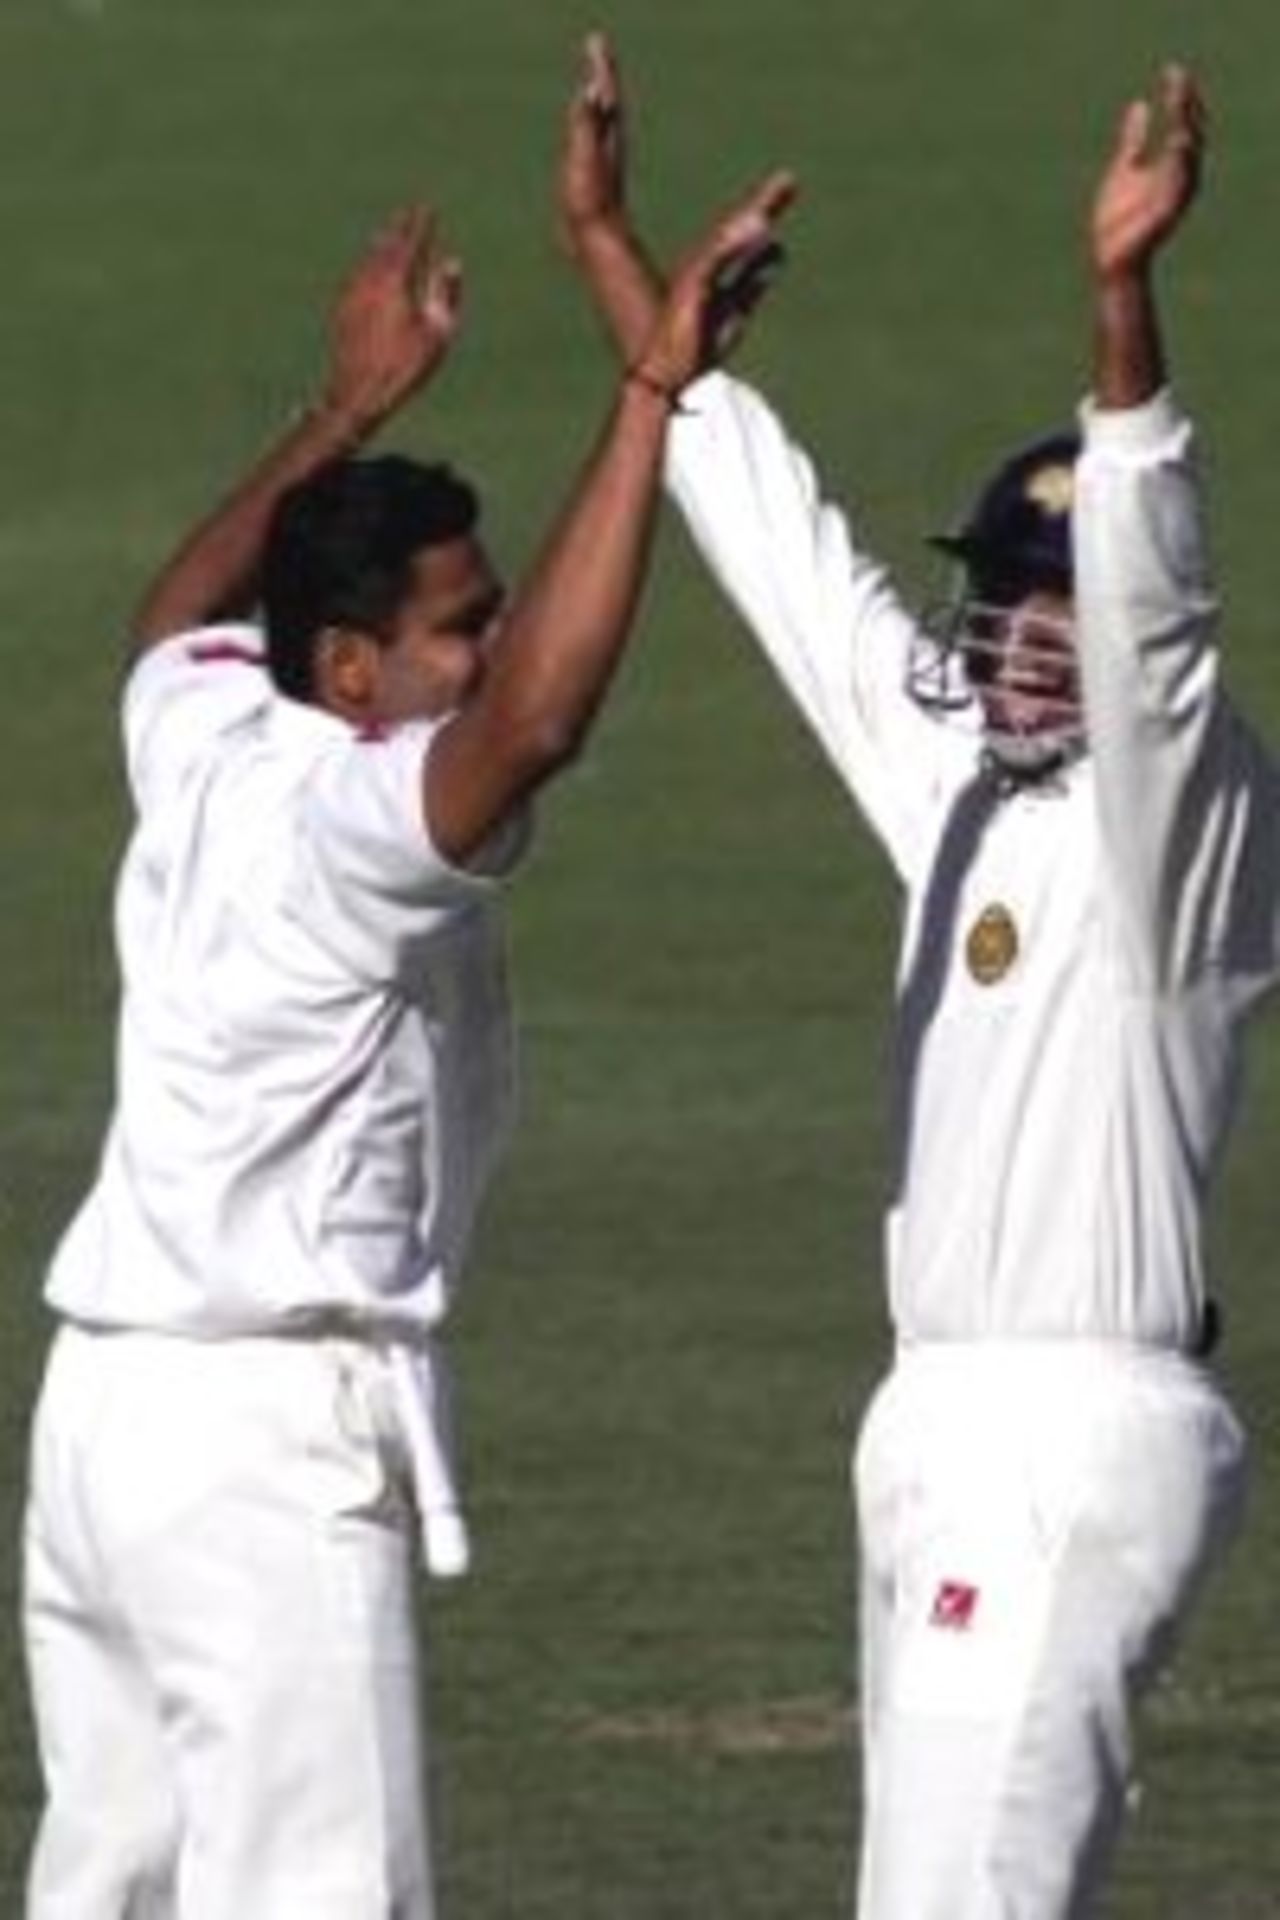 12 Dec 1999: Anil Kumble and Devang Gandhi of India celebrate after Gandhi caught Justin Langer of Australia off Kumble's bowling, on three of the first test between Australia and India, at the Adelaide Oval, Adelaide, Australia.